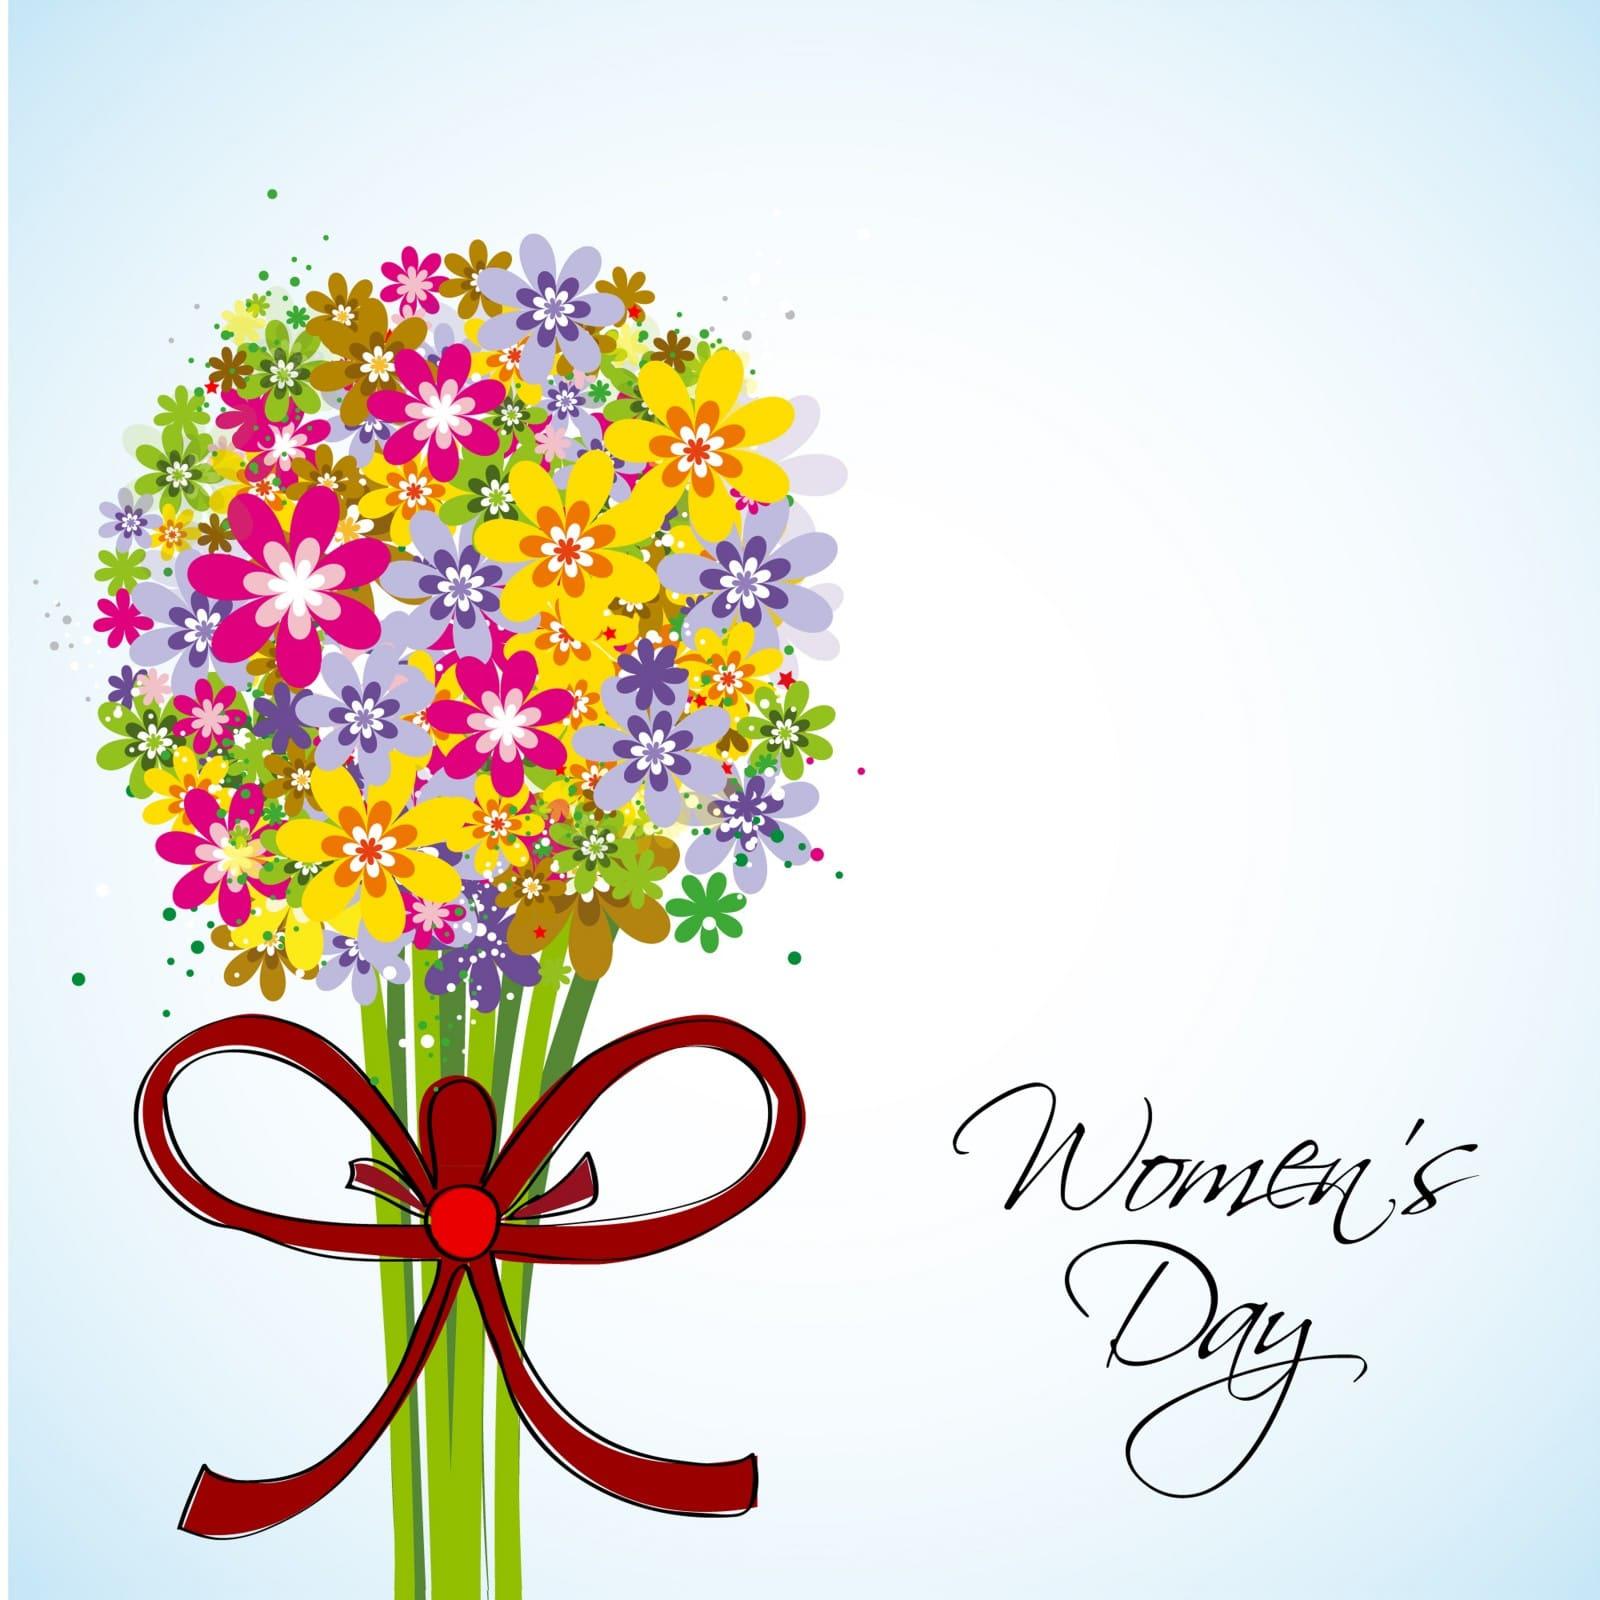 Happy Women's Day Image and Women wallpaper Photo. Quote Image